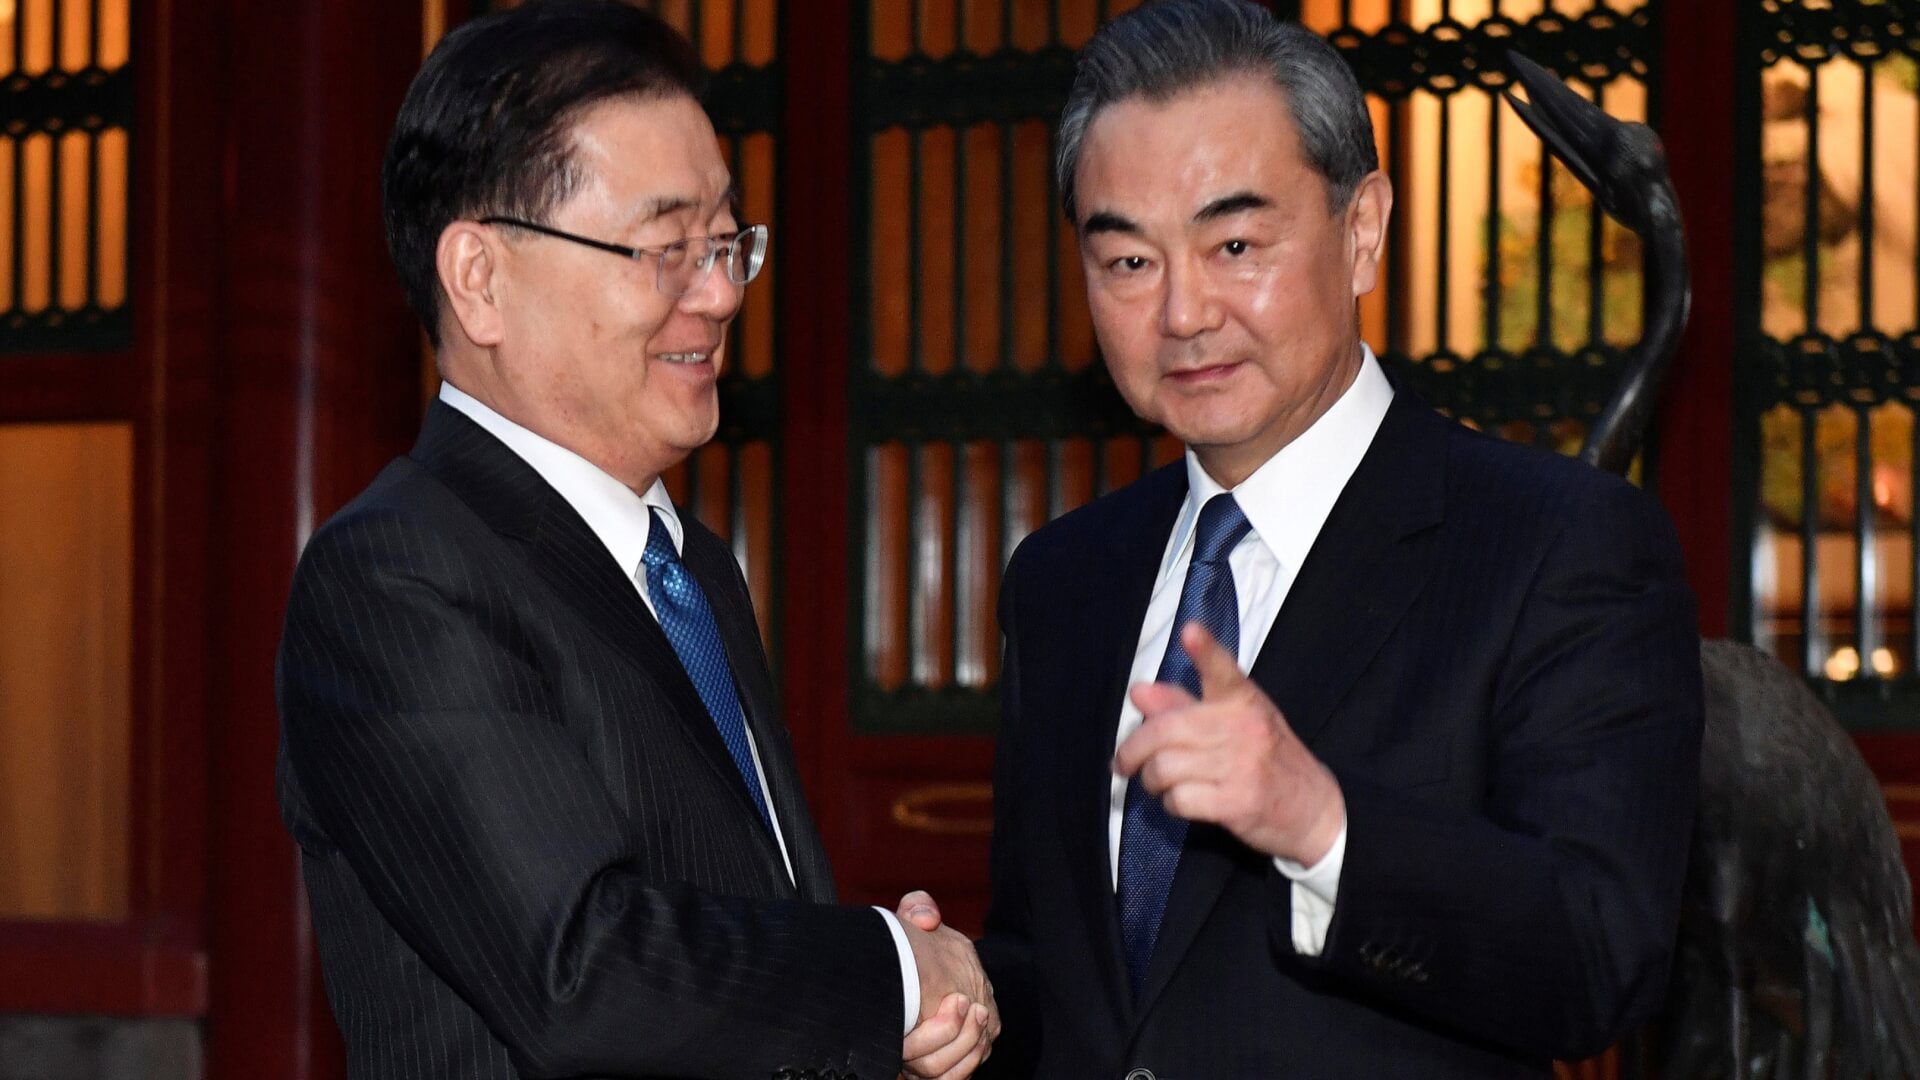 South Korea Calls on China to Play “Constructive Role” in Denuclearisation of North Korea